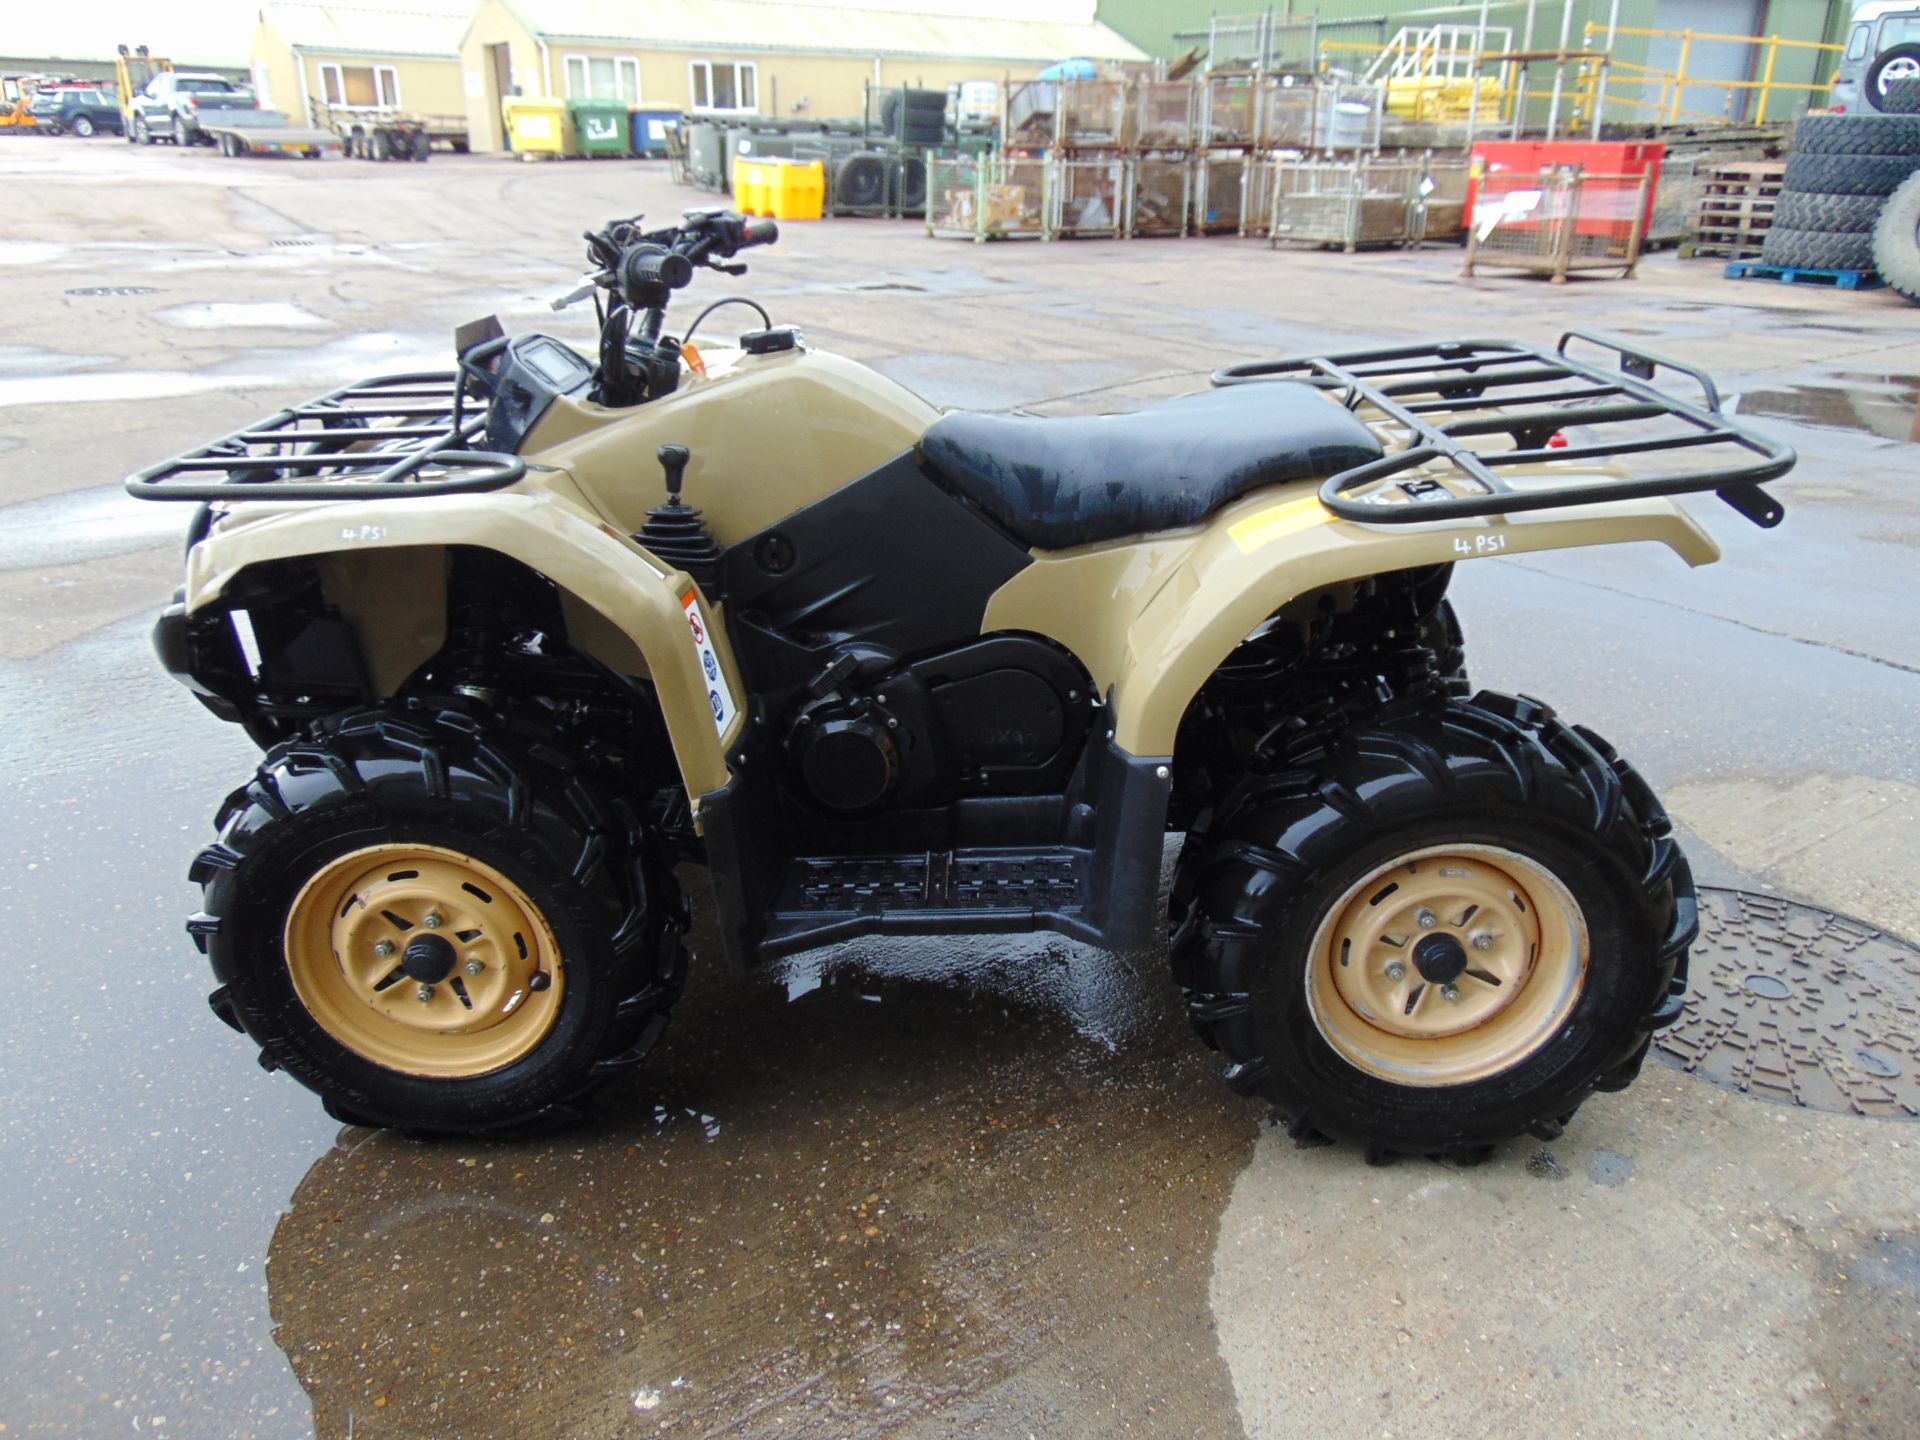 Military Specification Yamaha Grizzly 450 4 x 4 ATV Quad Bike - Image 6 of 23